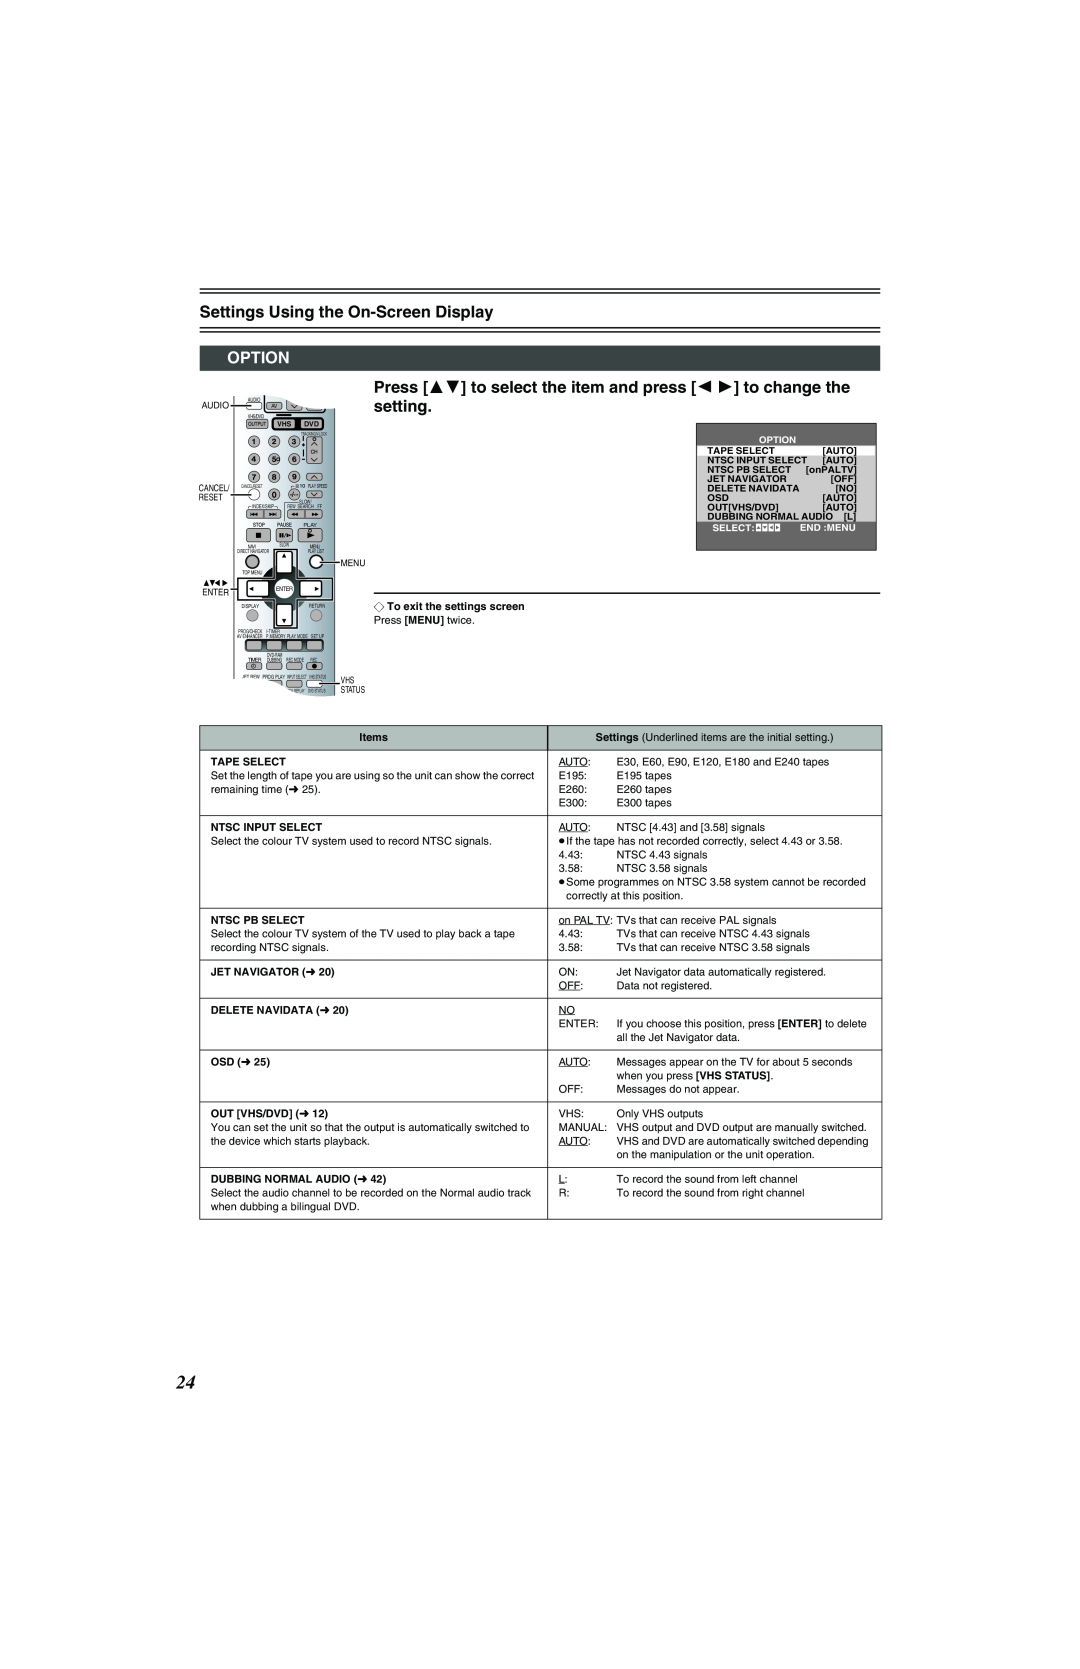 Panasonic NV-VP32 Series manual Option, Press 34 to select the item and press 2 1 to change the setting, Items, Tape Select 